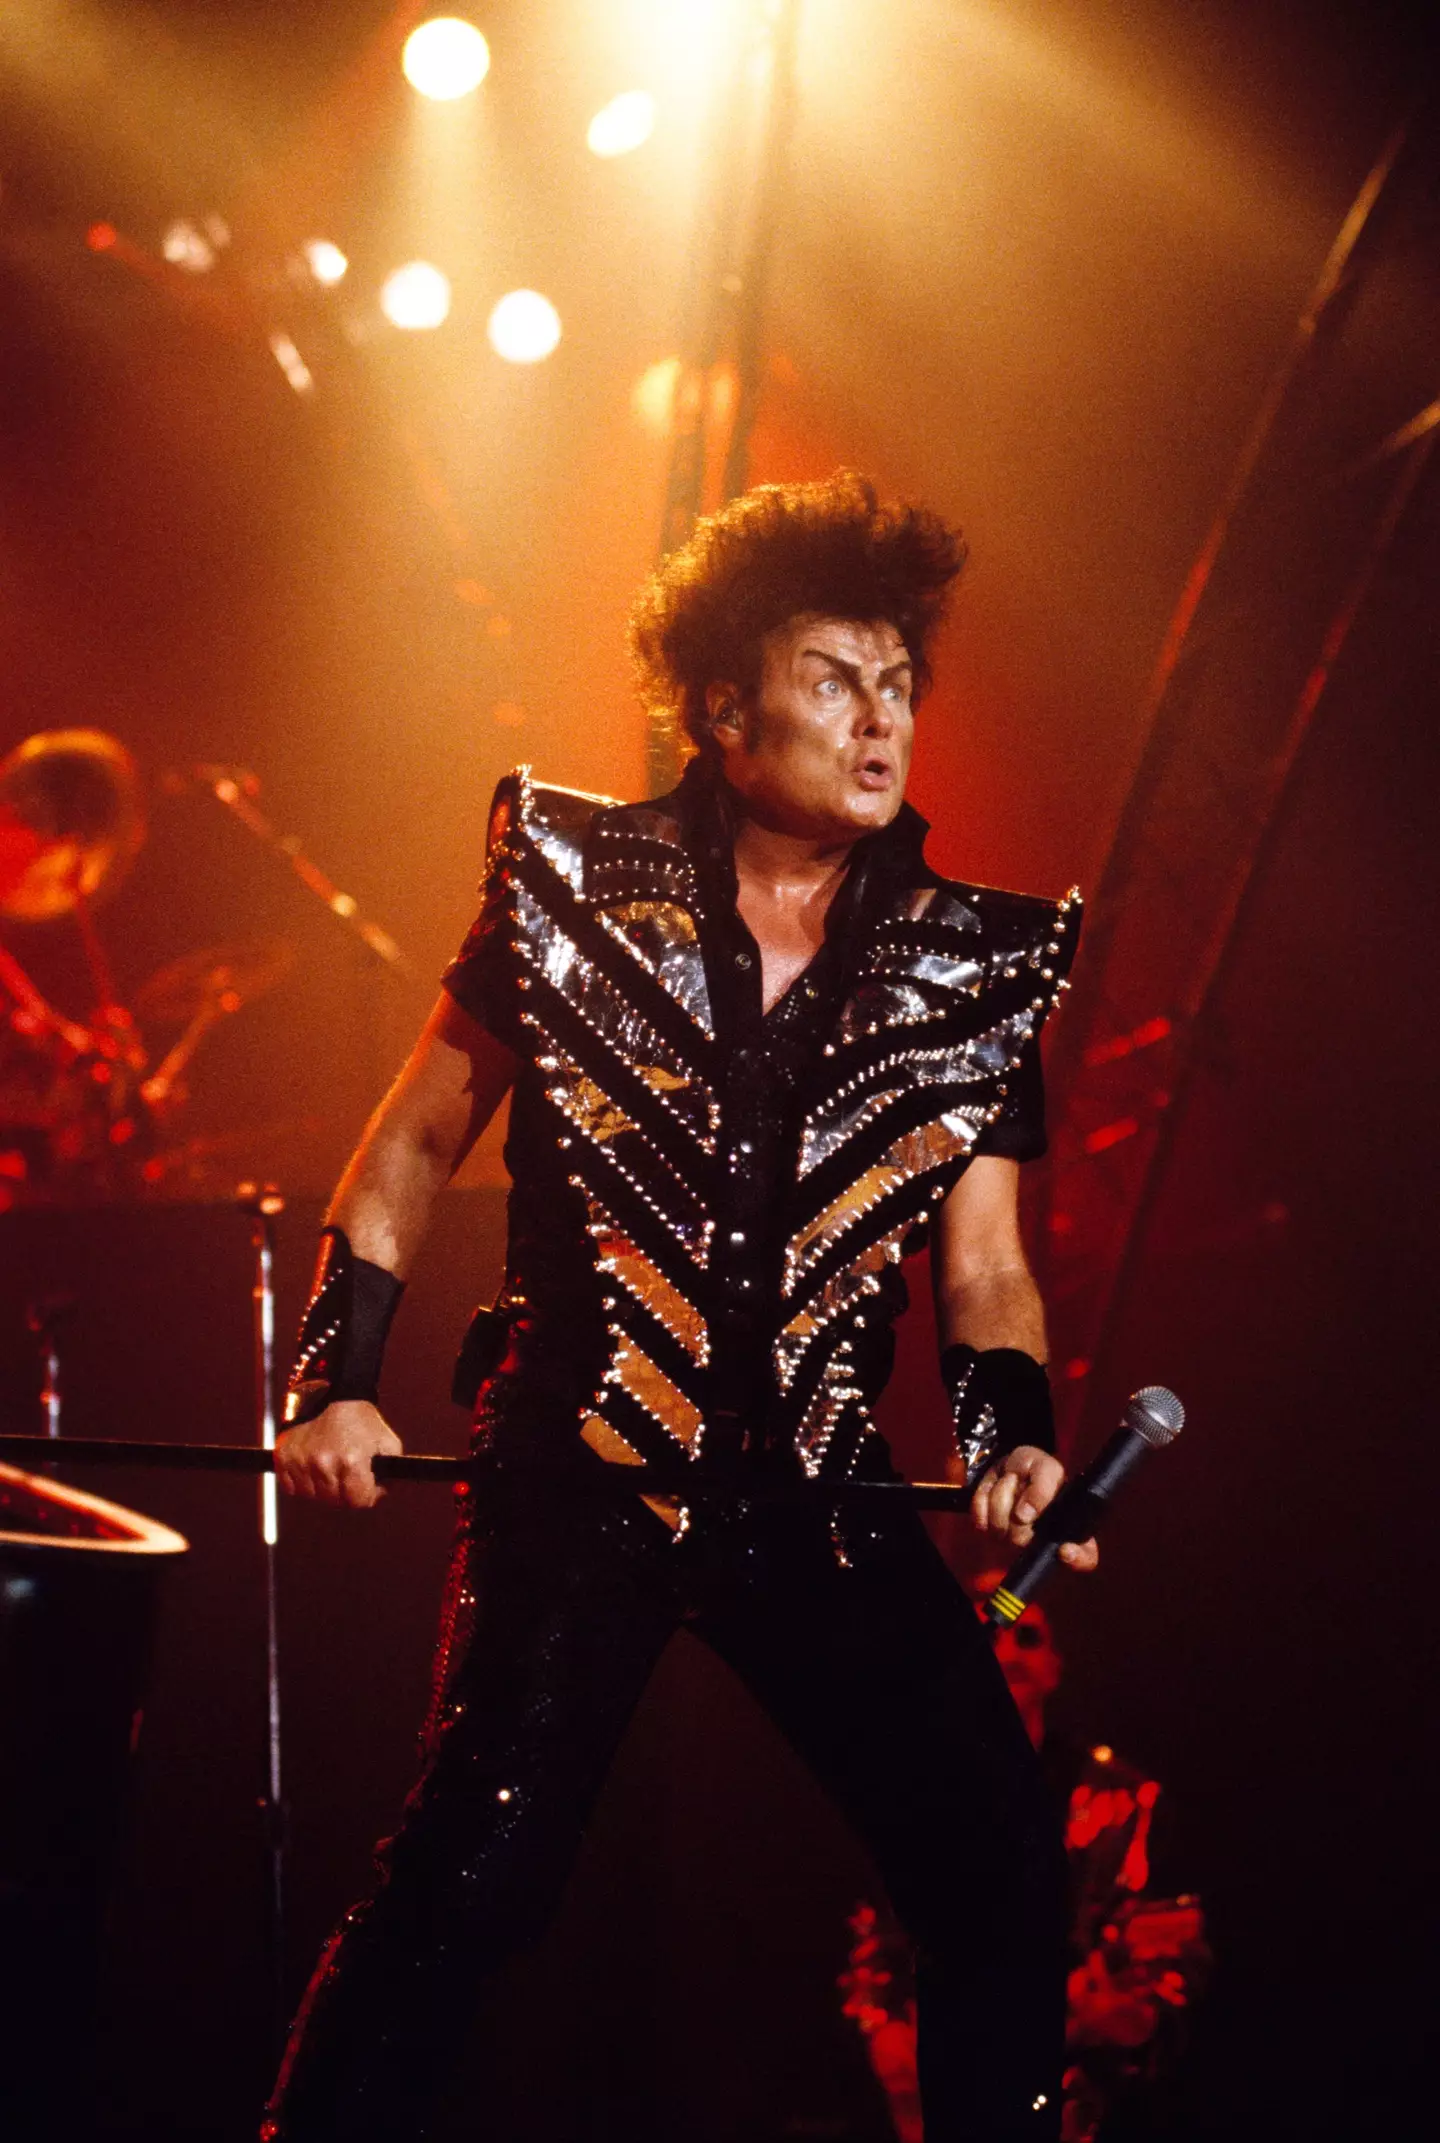 At the height of his fame, Gary Glitter had 12 Top 10 singles.